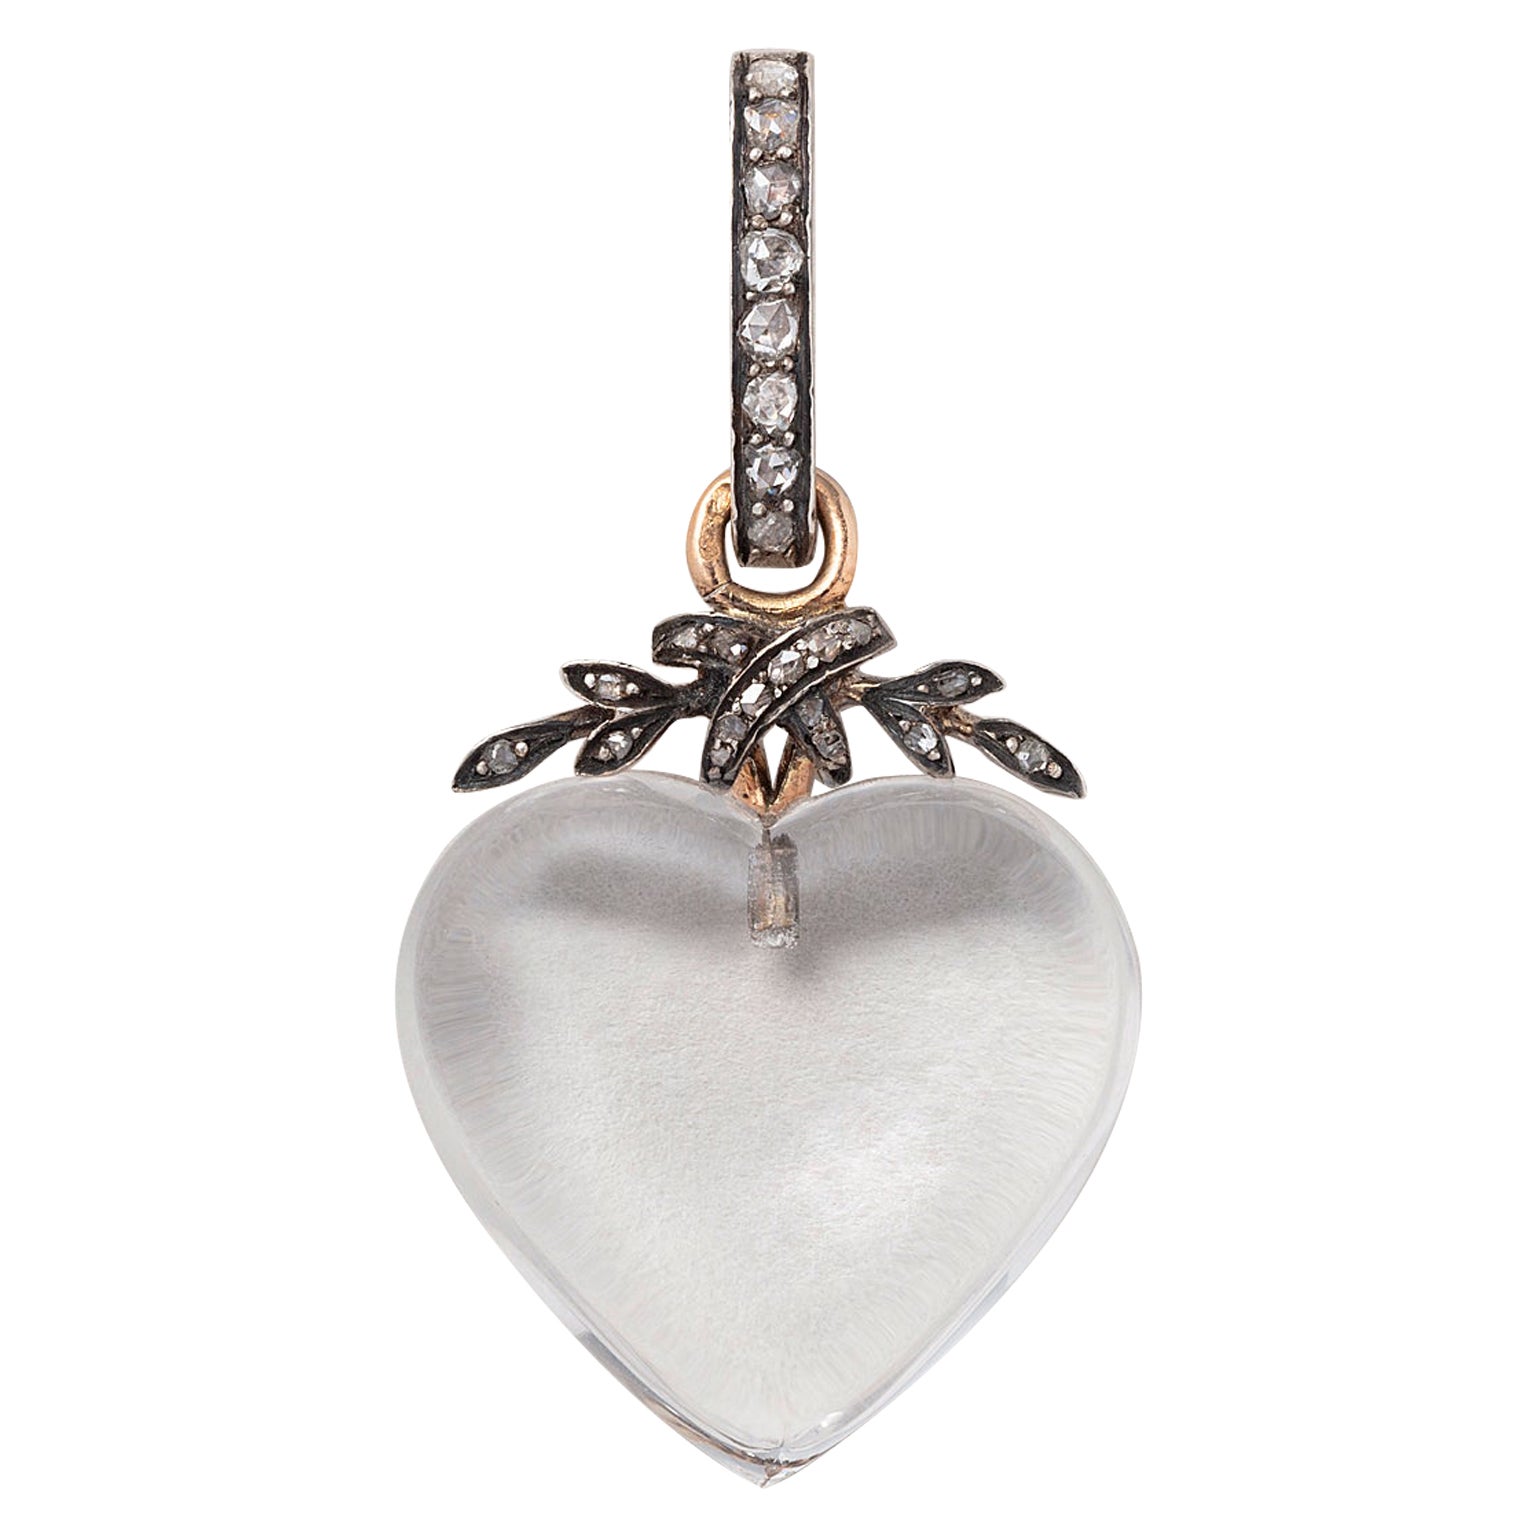 An Antique Gold and Silver Heart Pendant with Rock Crystal and diamondsDiamond For Sale